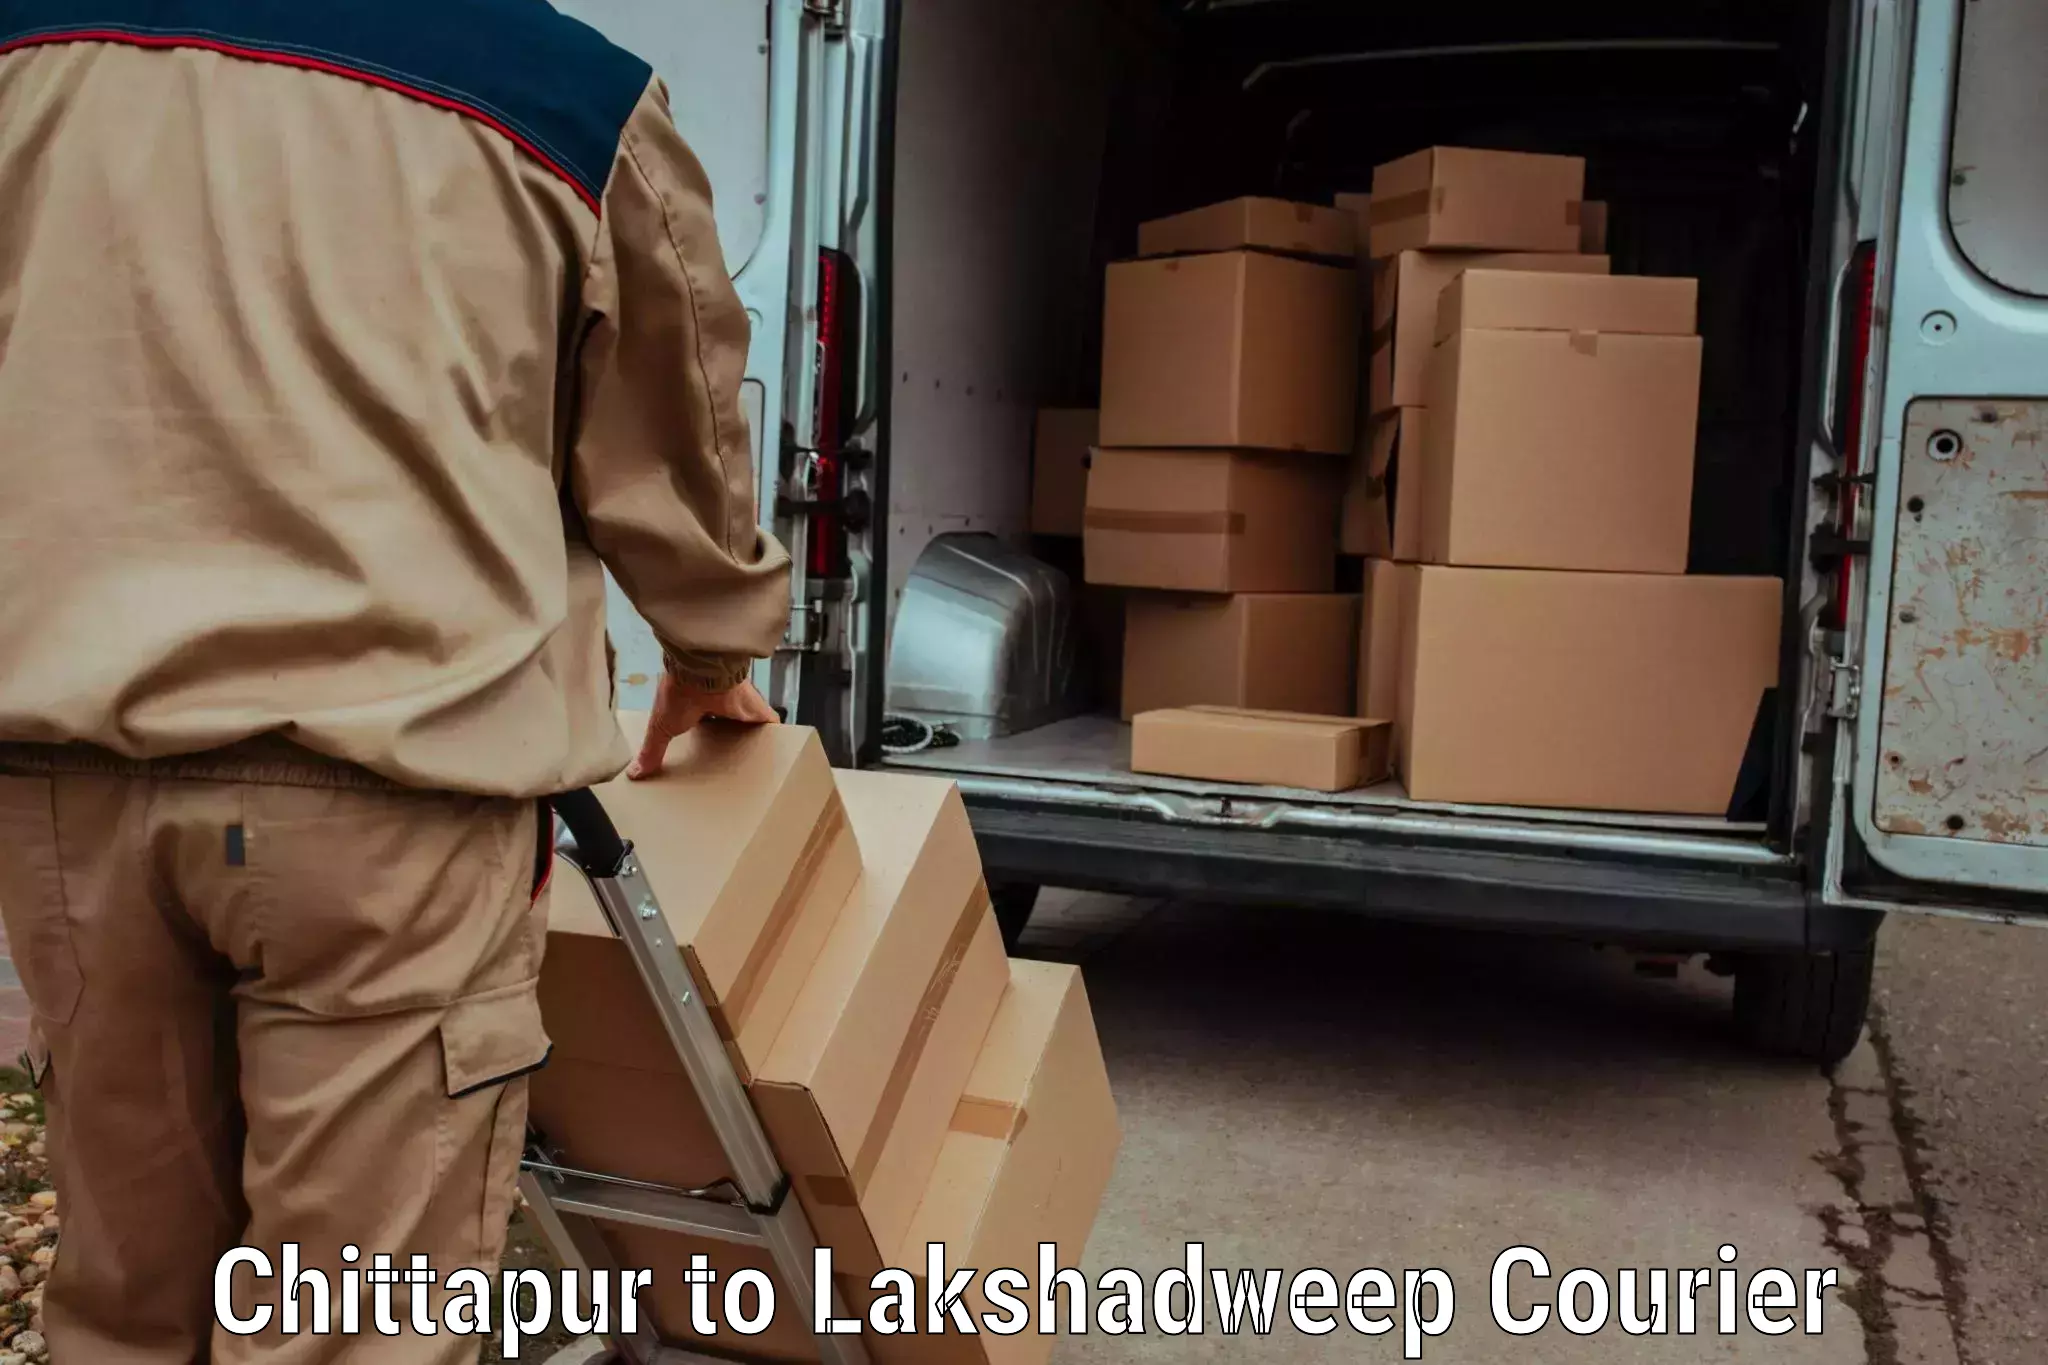 Easy access courier services Chittapur to Lakshadweep